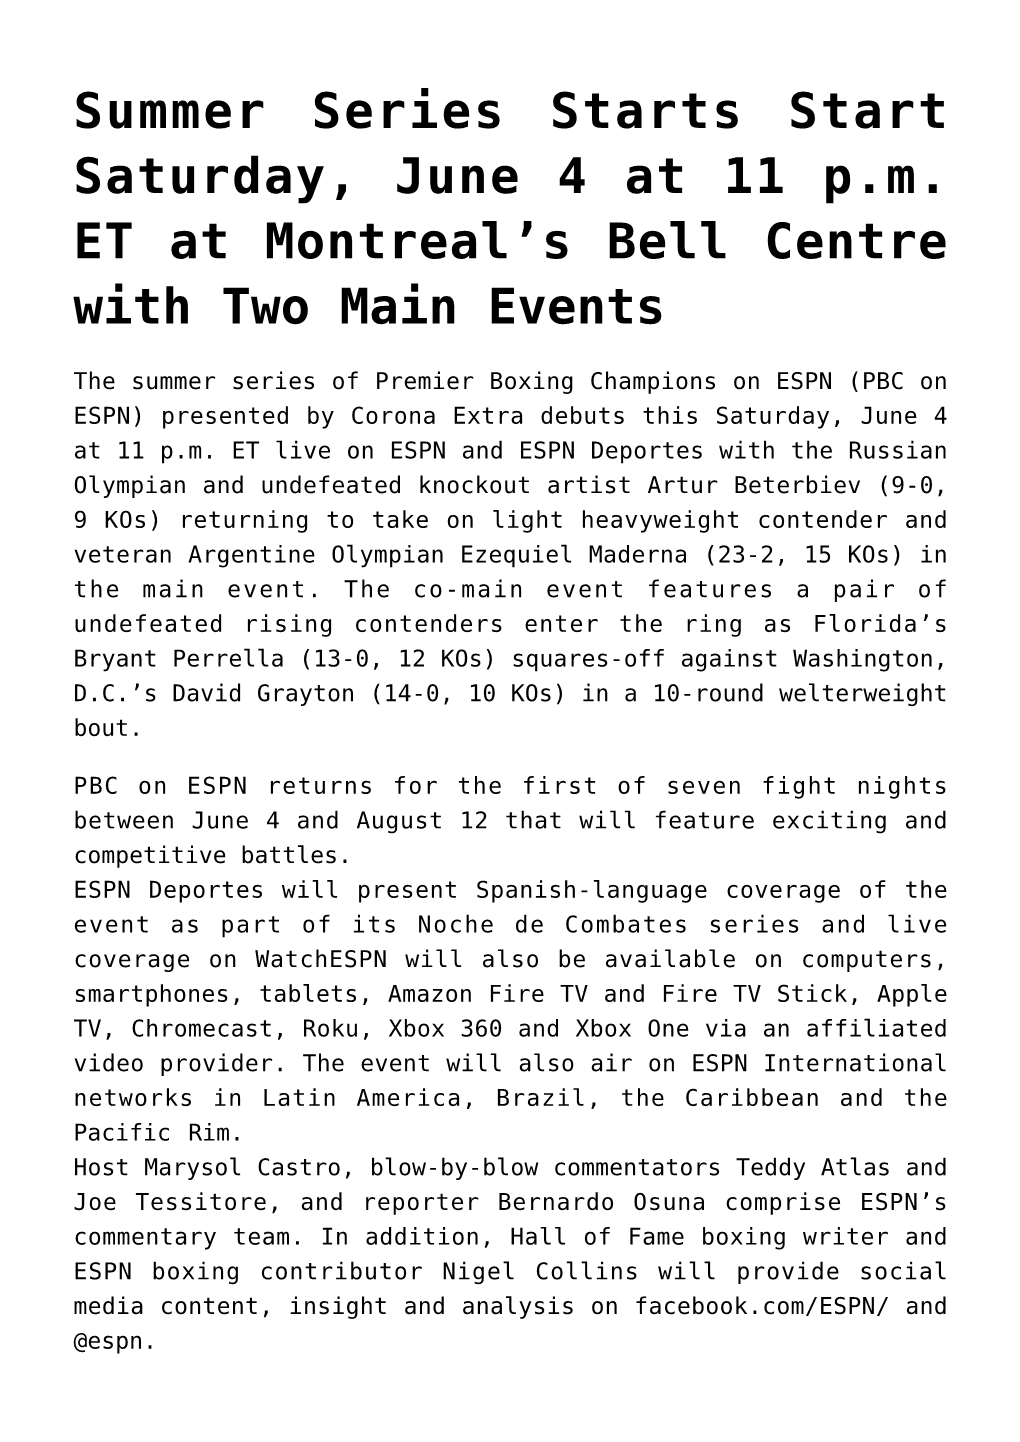 Summer Series Starts Start Saturday, June 4 at 11 P.M. ET at Montreal's Bell Centre with Two Main Events